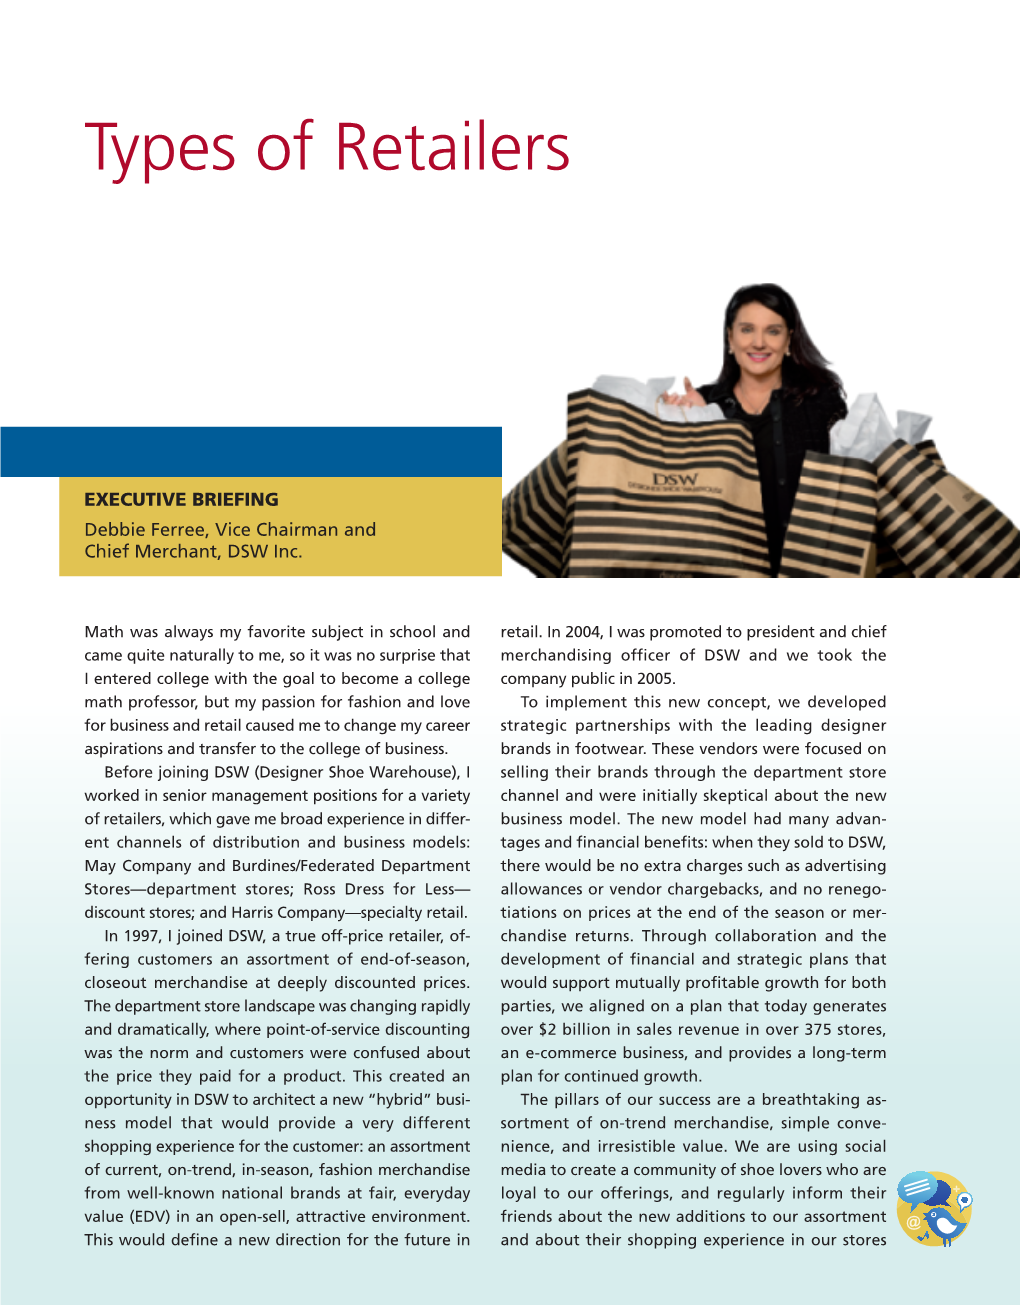 Types of Retailers